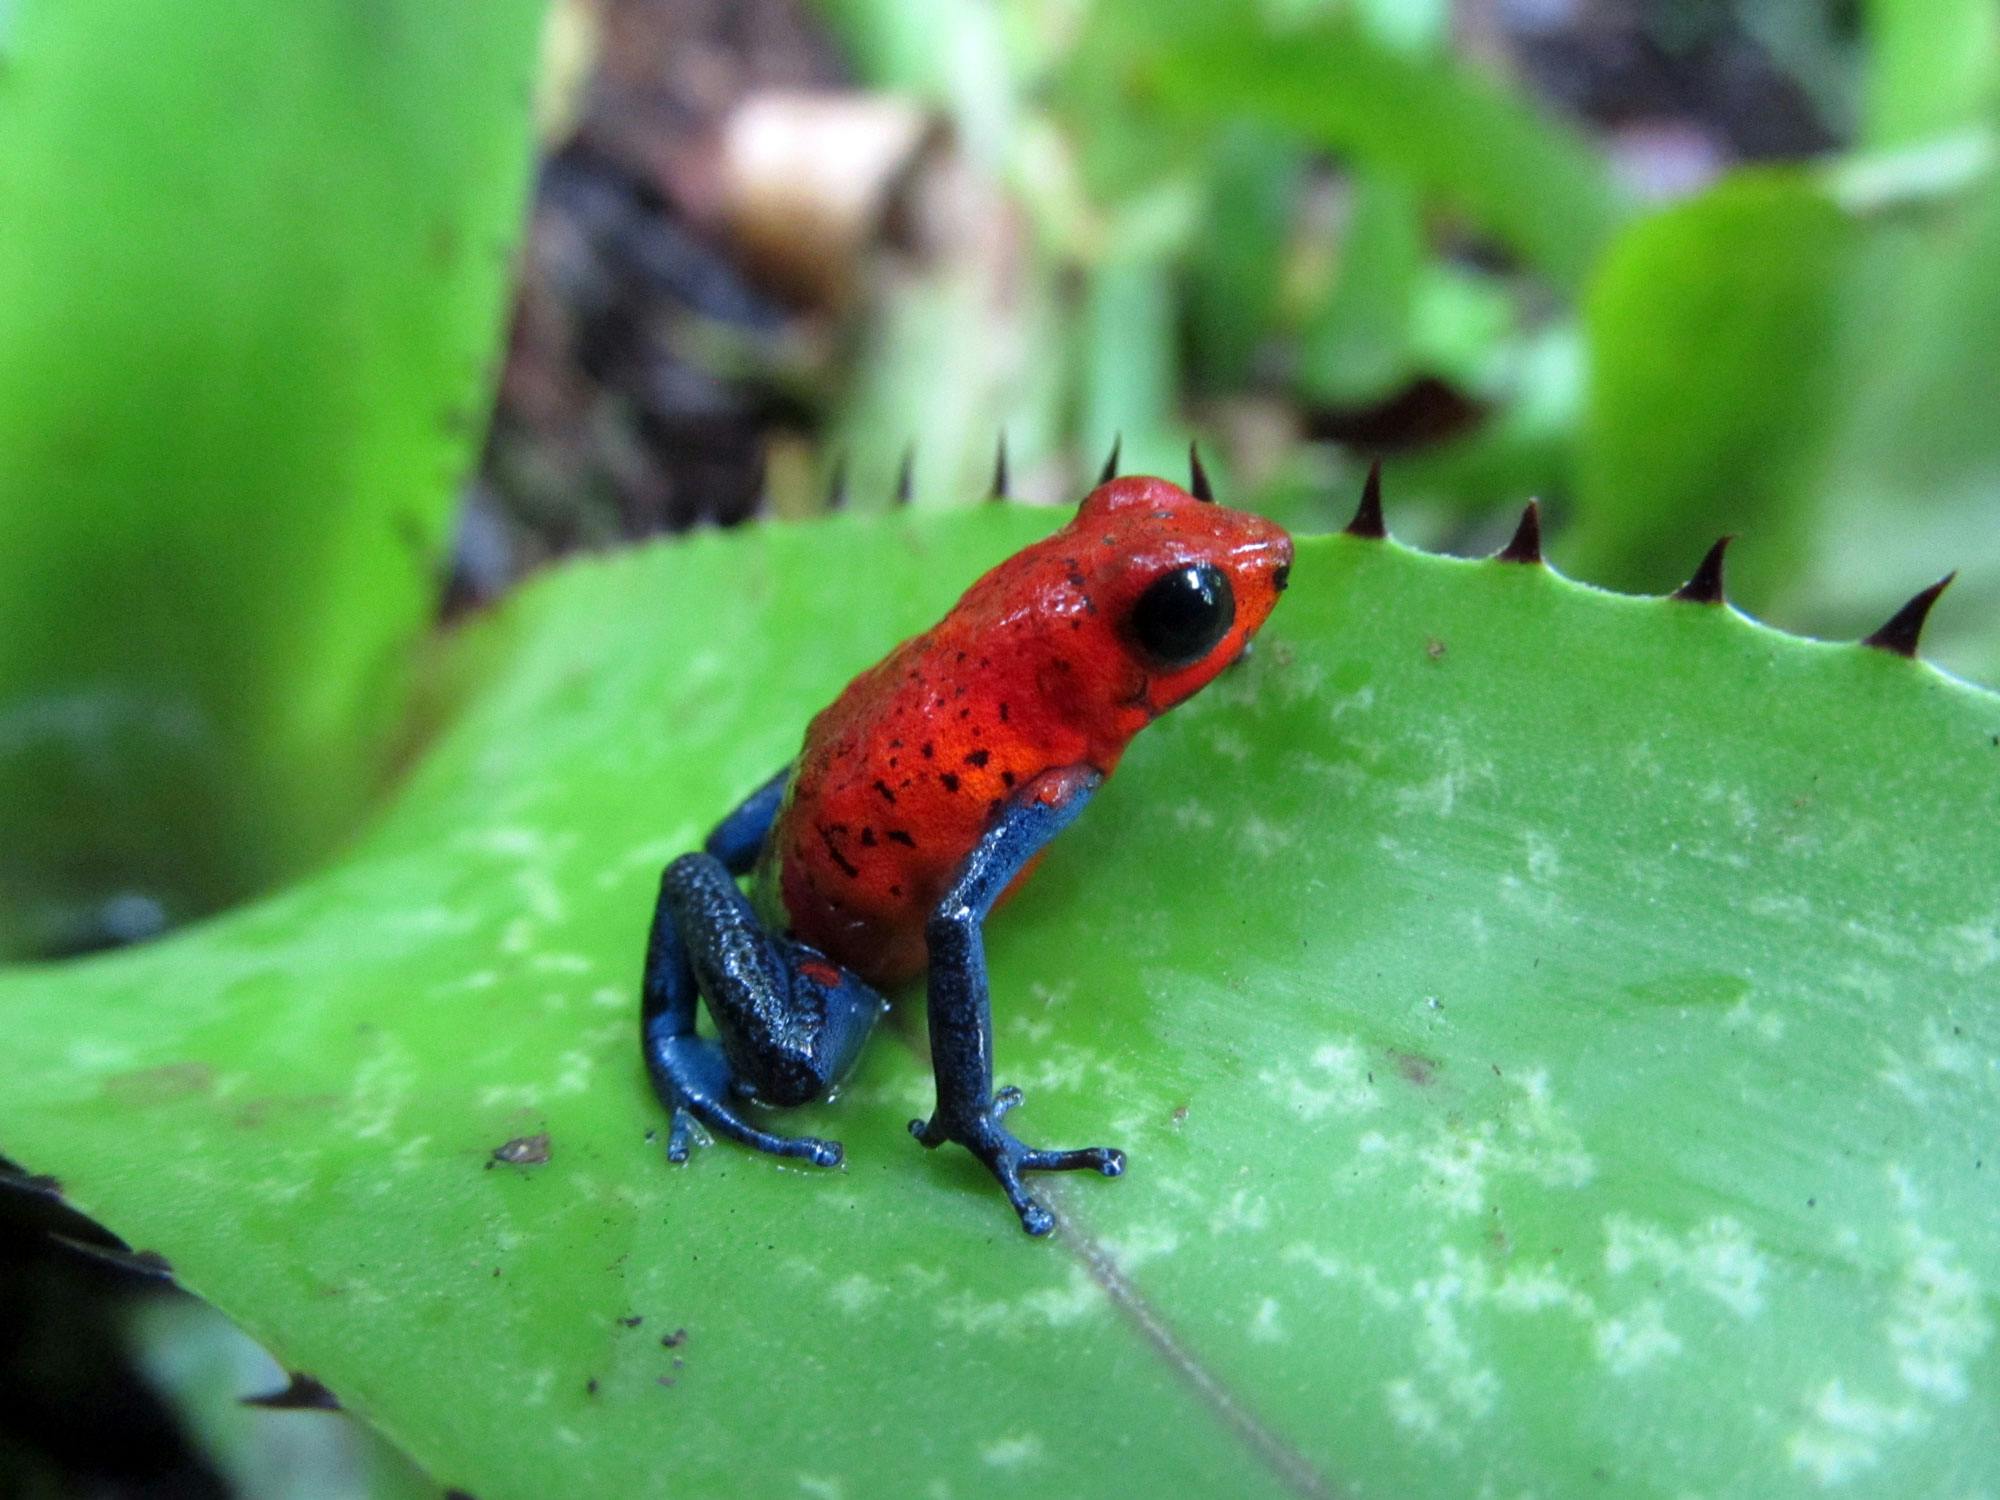 A bright red frog with blue legs perches on a wide green leaf that has spikes along its edges.